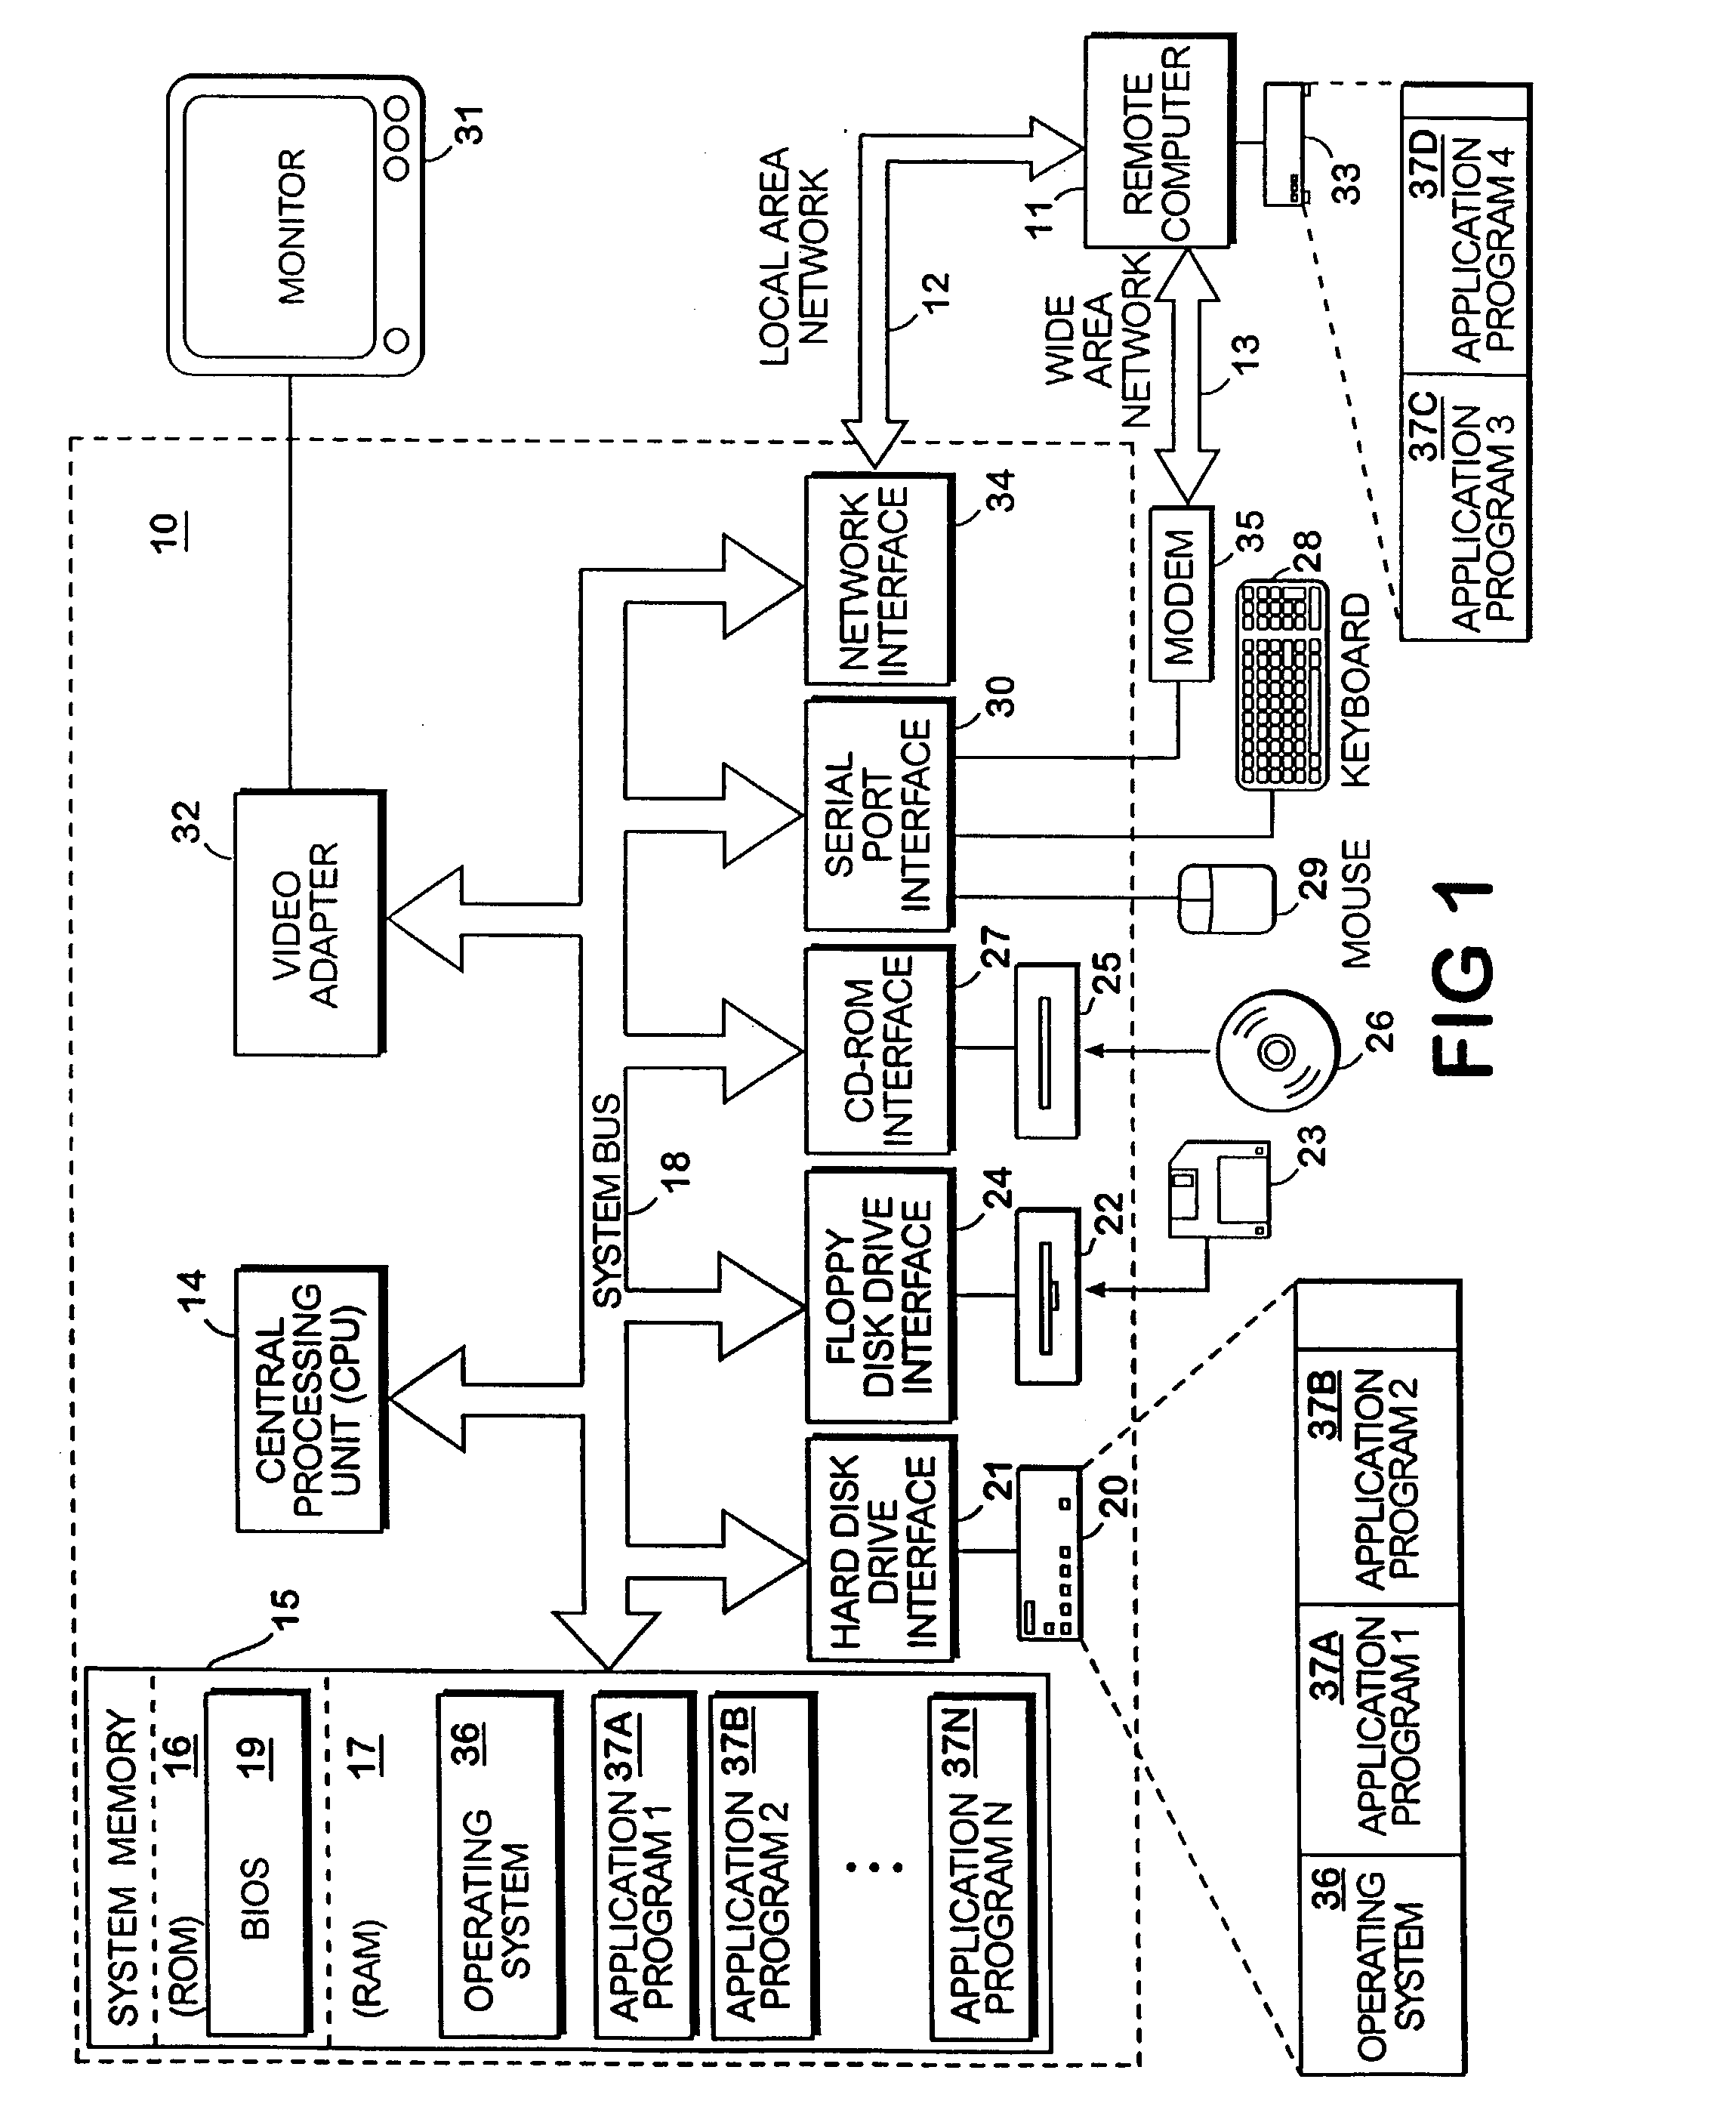 System and method for composing, processing, and organizing electronic mail message items